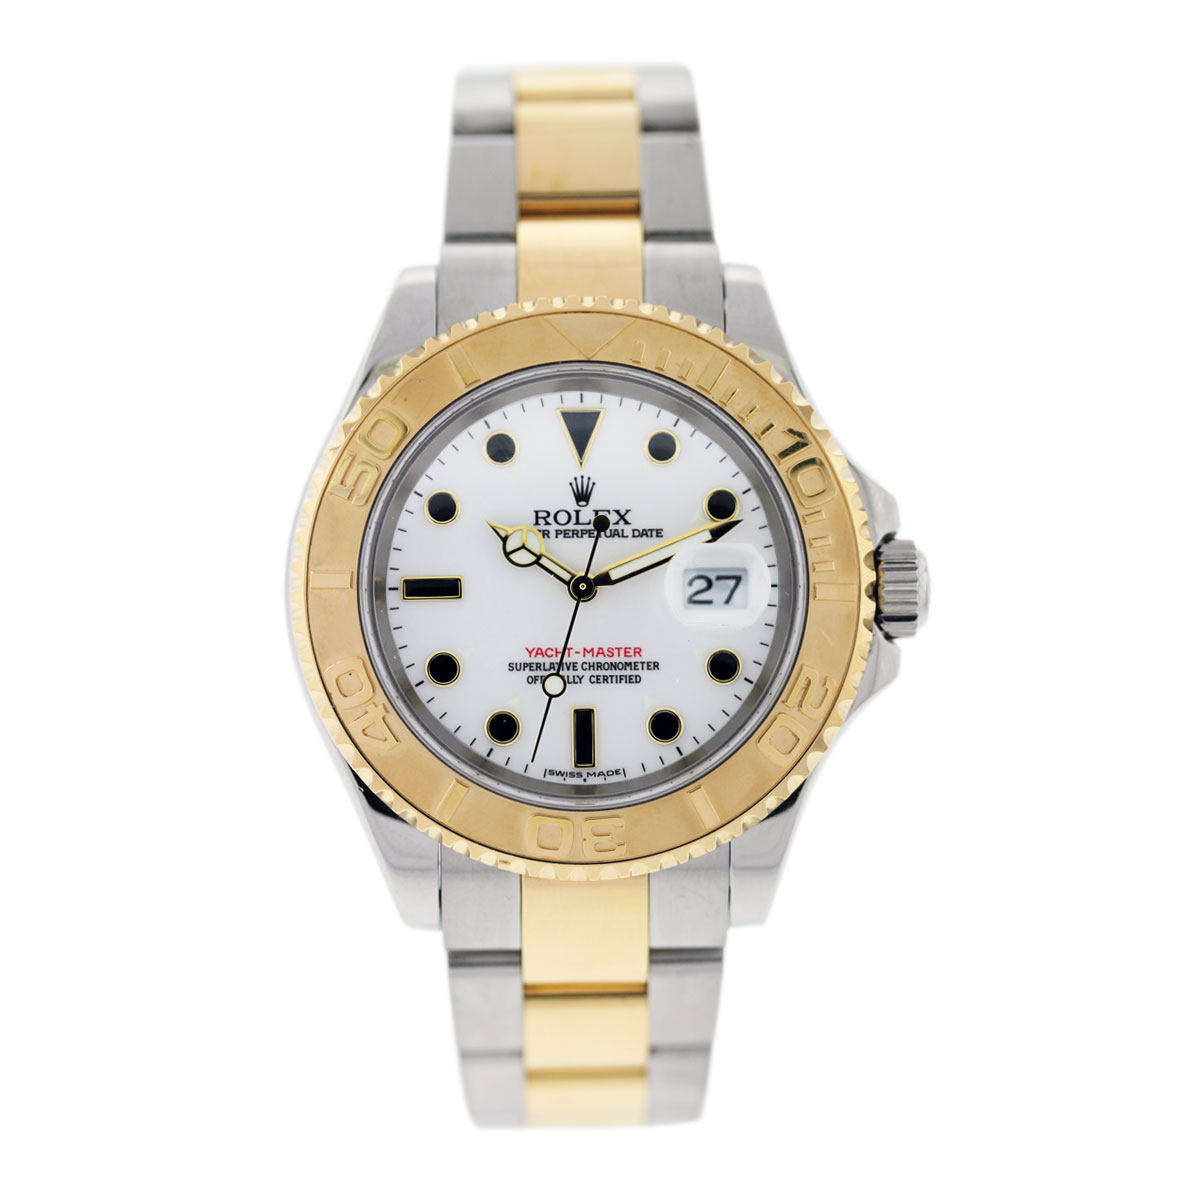 Rolex Yachtmaster 16623 Two Tone White Dial Mens Watch-Boca Raton